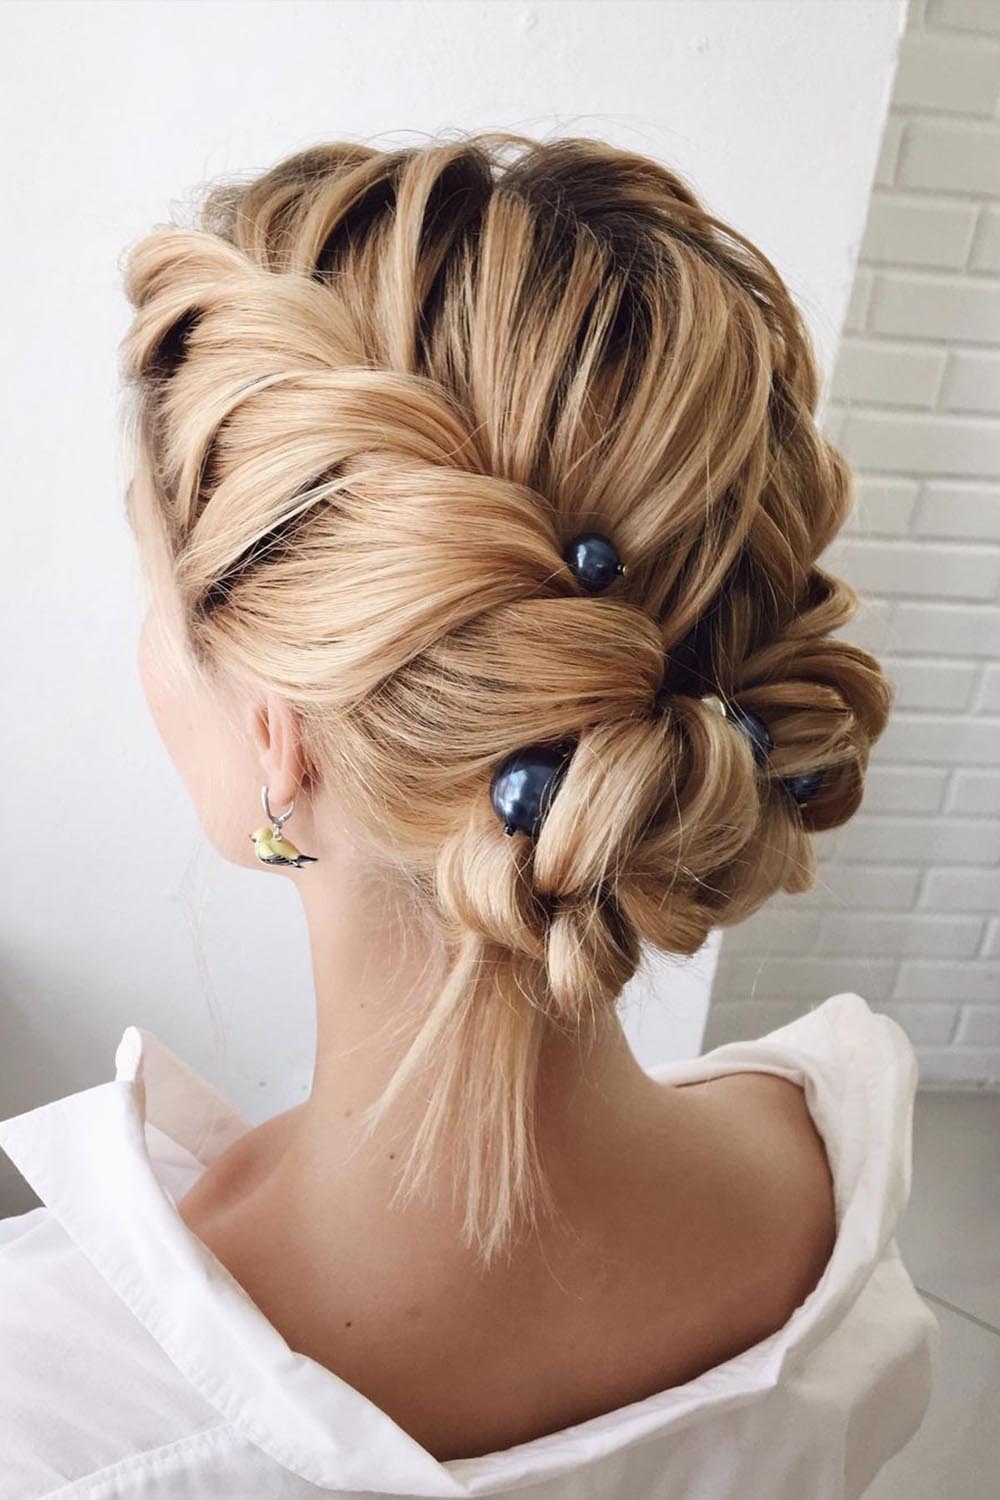 Blonde Up Braided Hair with Acessories